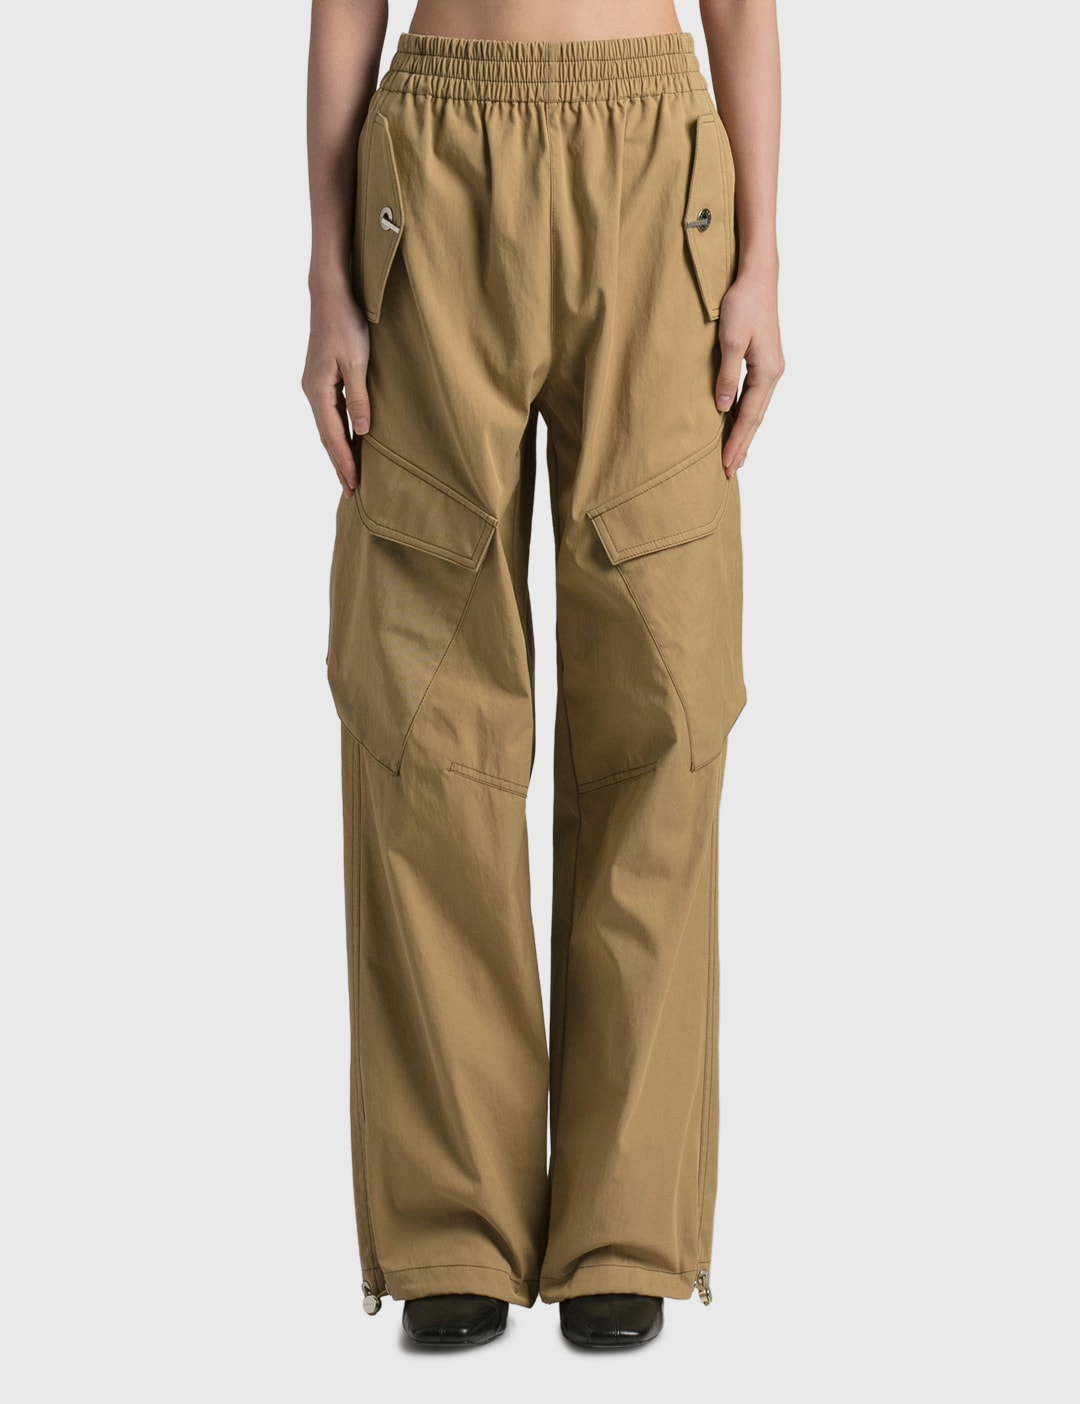 Dion Lee - Latch Cargo Pants | HBX - Globally Curated Fashion and Lifestyle  by Hypebeast